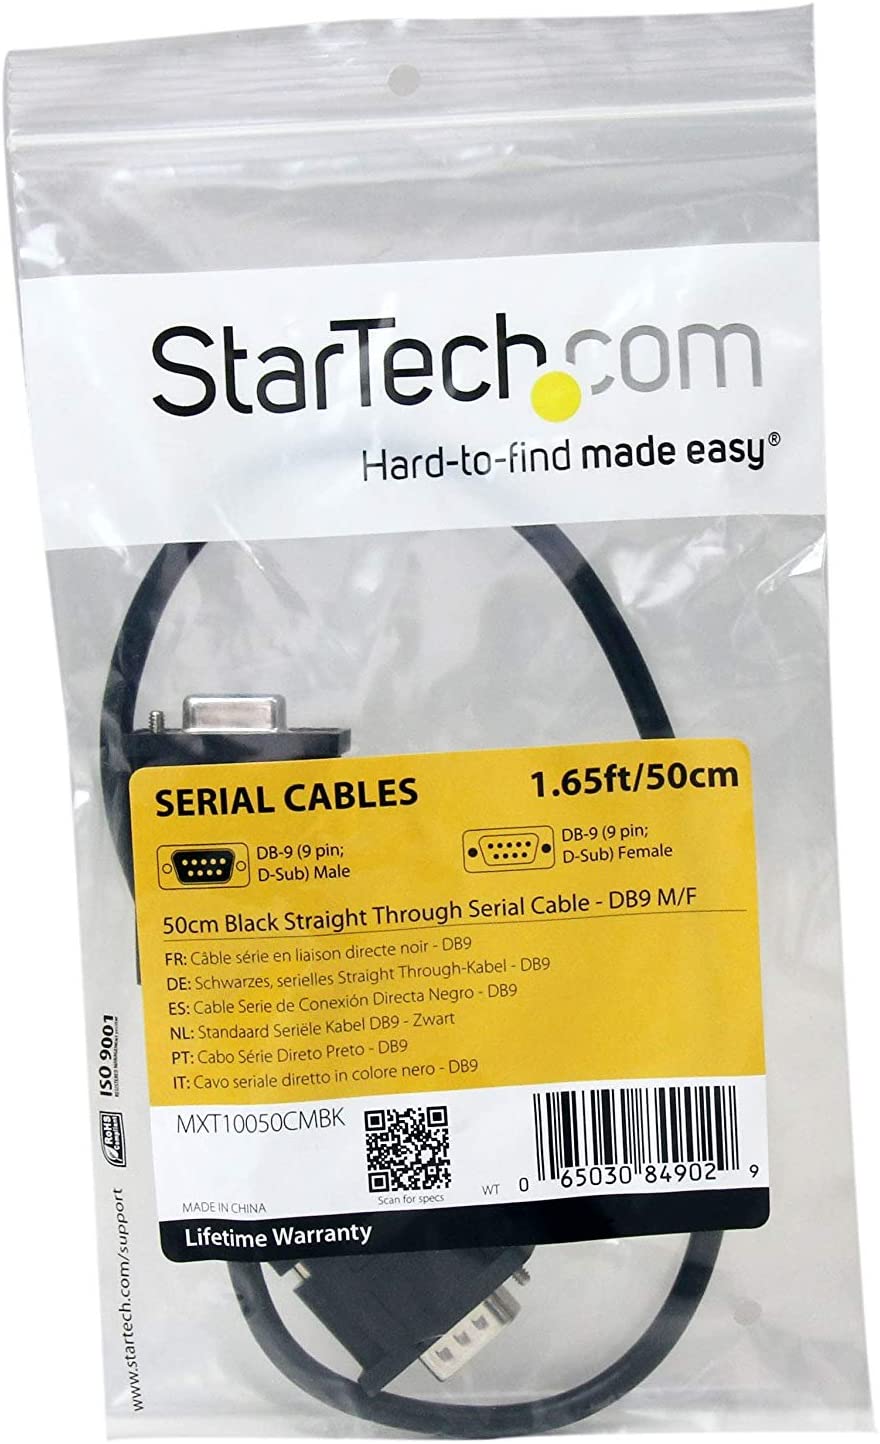 StarTech.com 0.5m Black Straight Through DB9 RS232 Serial Cable - DB9 RS232 Serial Extension Cable - Male to Female Cable - 50cm (MXT10050CMBK) Black 1.5 ft / 45cm Cable